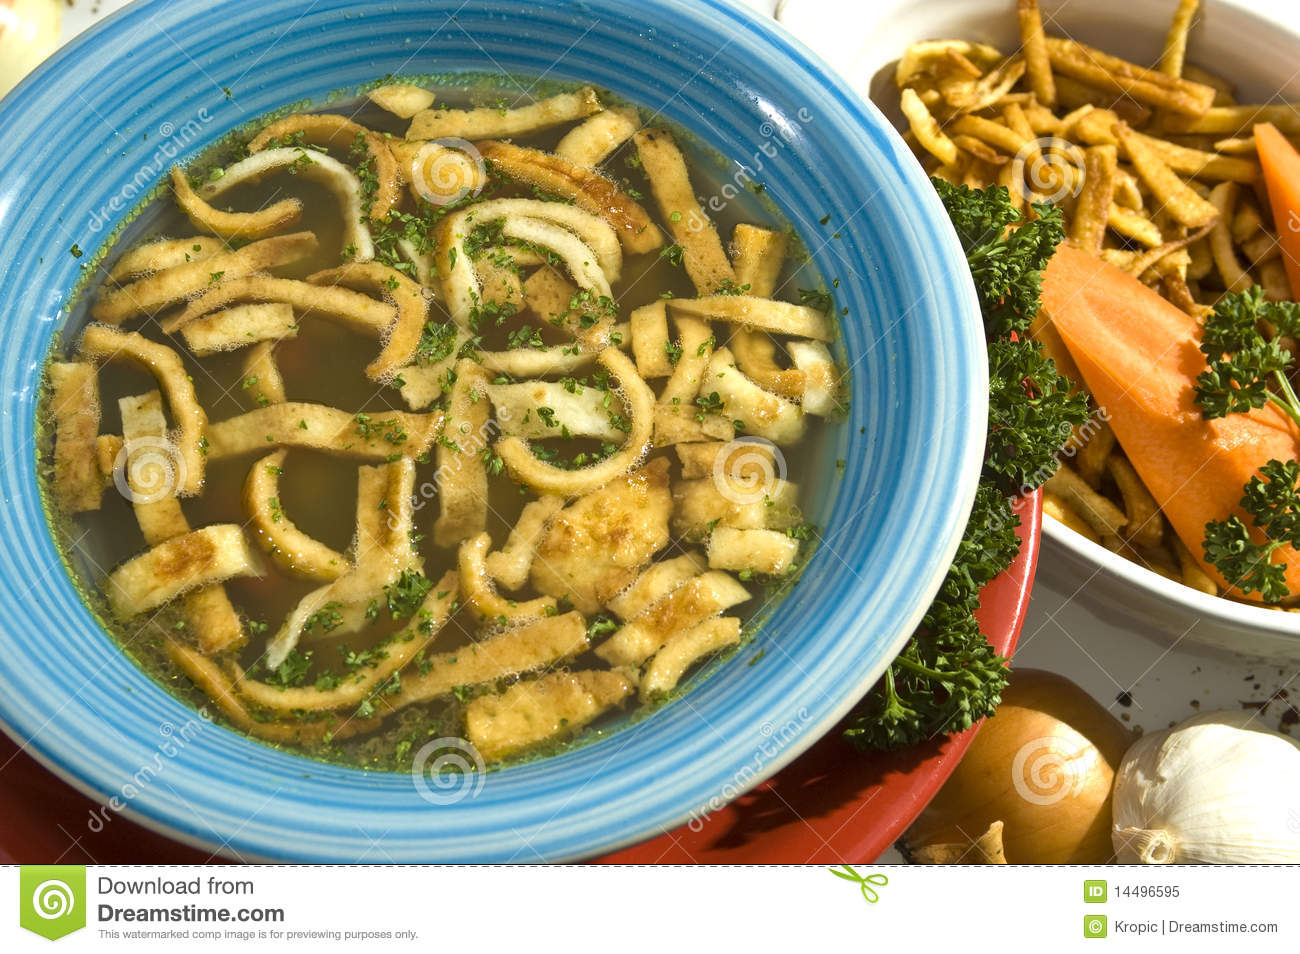 Beef Soup W Noodles Royalty Free Stock Photo   Image  14496595